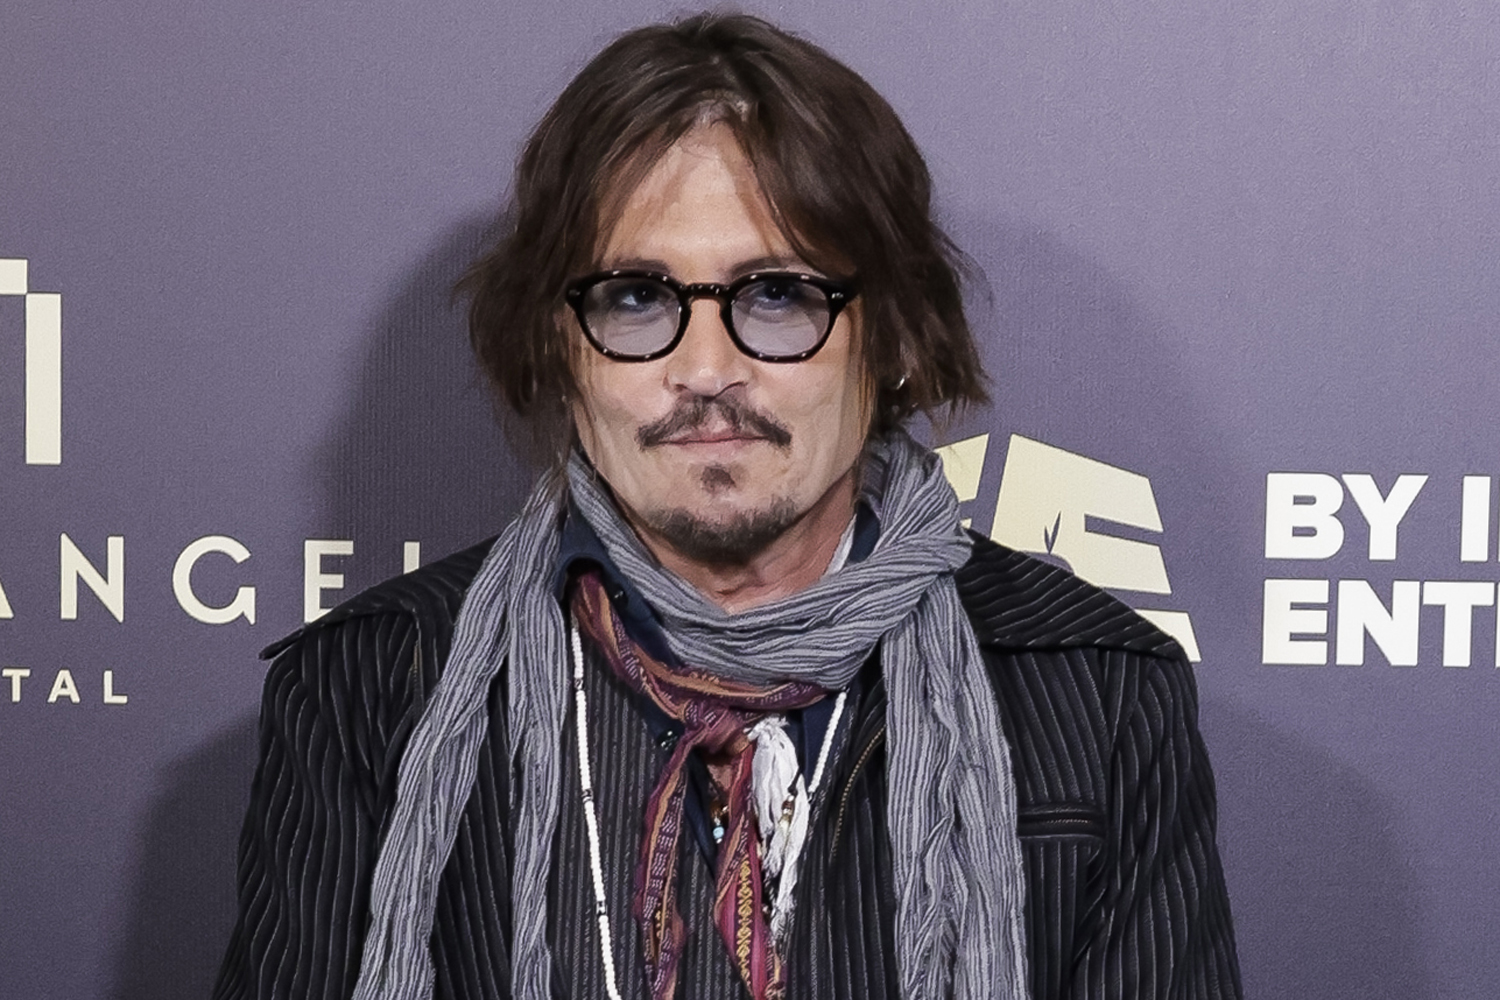 BELGRADE, SERBIA - OCTOBER 19:  US actor Johnny Depp attends the promotion of the animated series "Puffins" in Belgrade on October 19, 2021. (Photo by Srdjan Stevanovic/Getty Images)